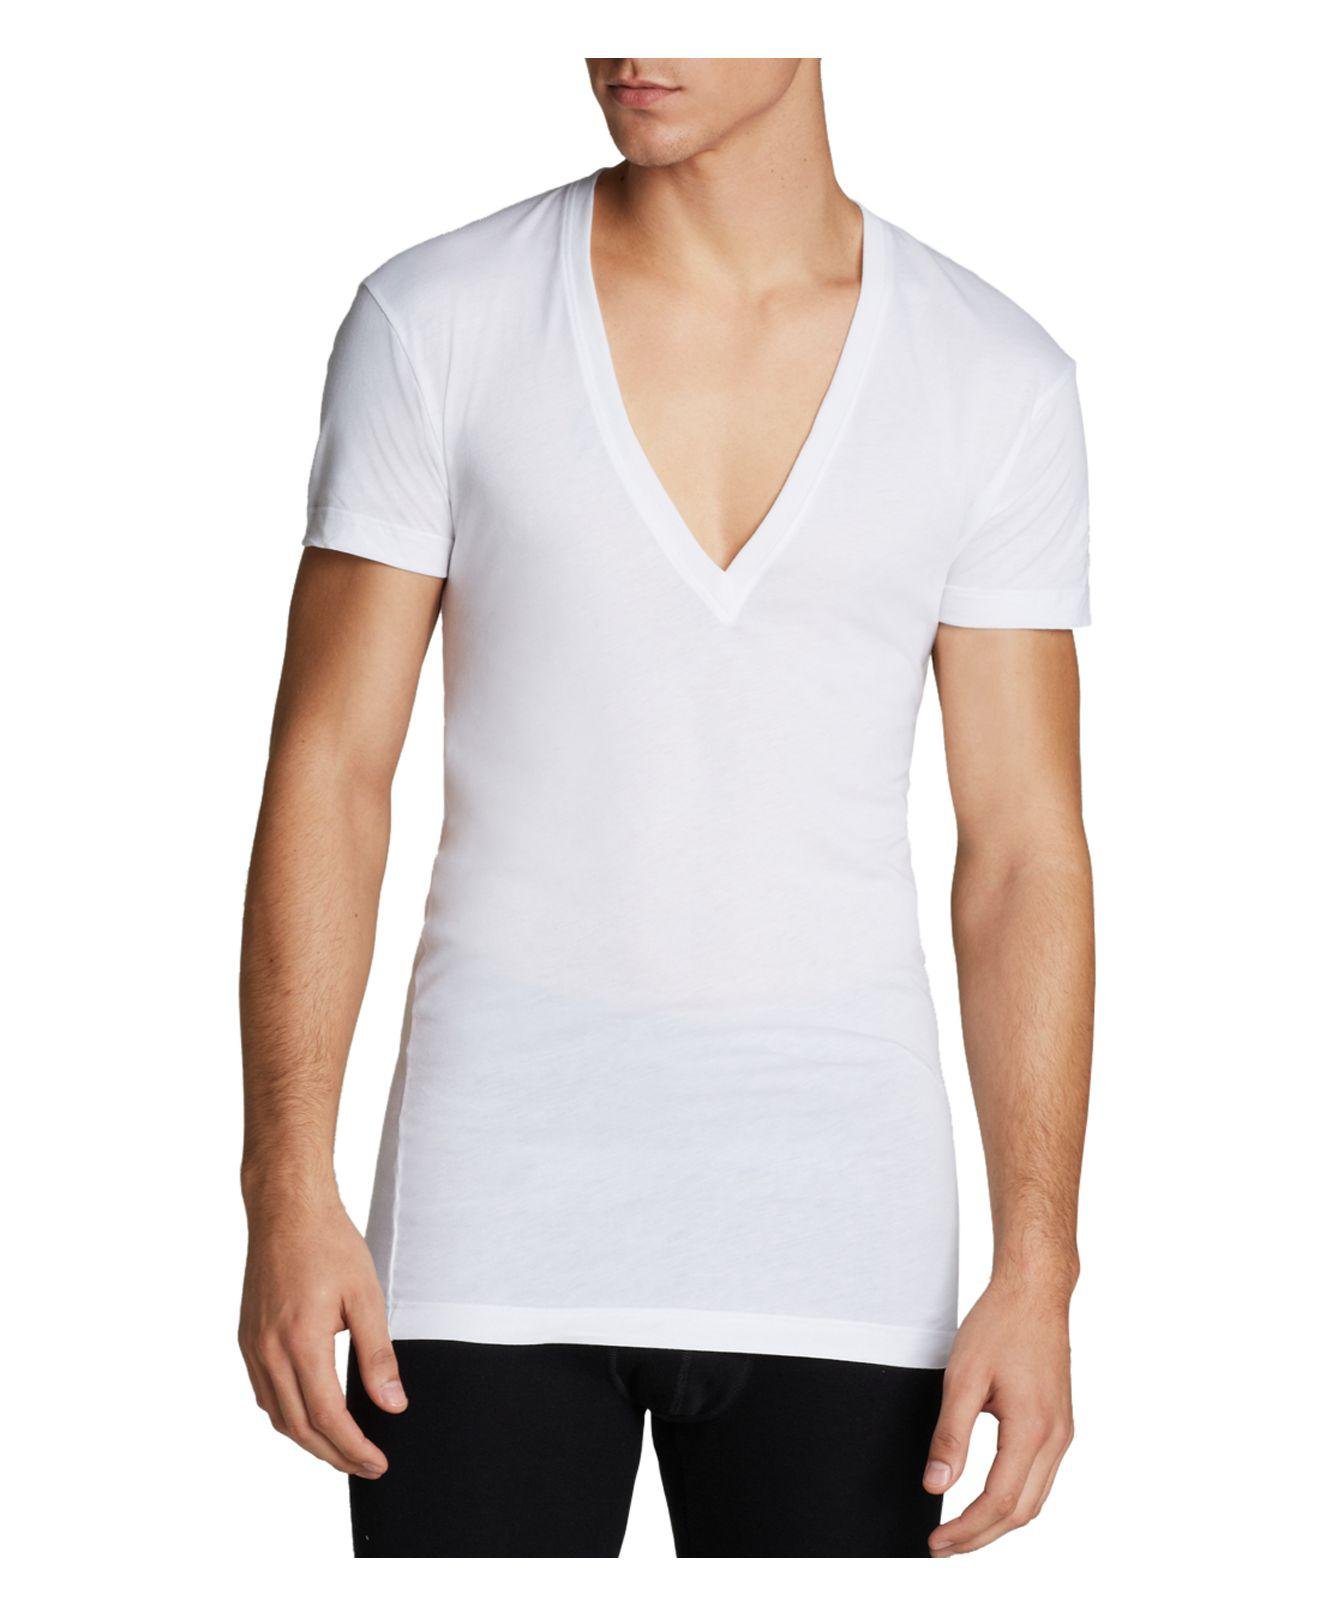 Lyst - 2Xist Pima Cotton Slim Fit Deep V-neck Tee in White for Men